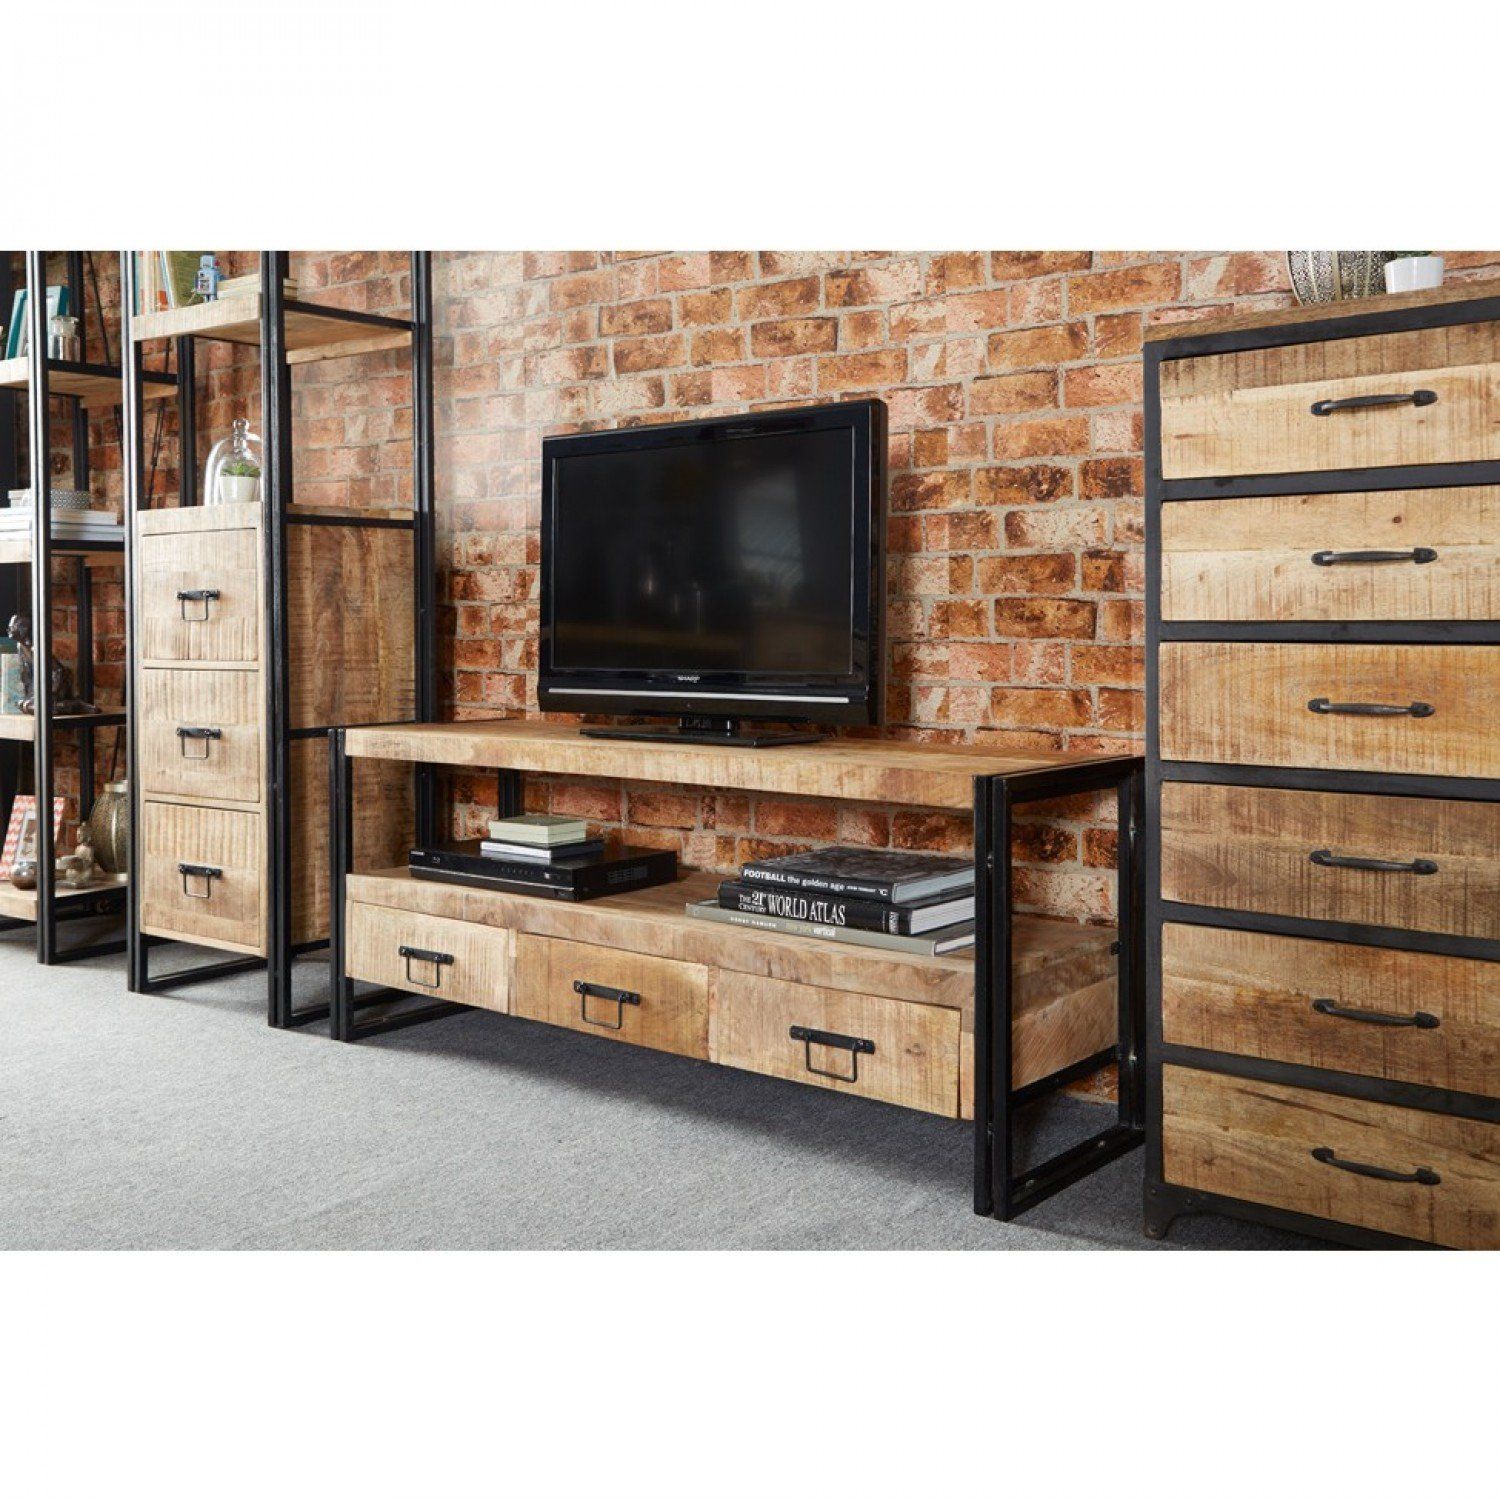 Cosmo Industrial Large Plasma Tv Stand | Oak Furniture House Intended For Tv Stands For Plasma Tv (View 3 of 15)